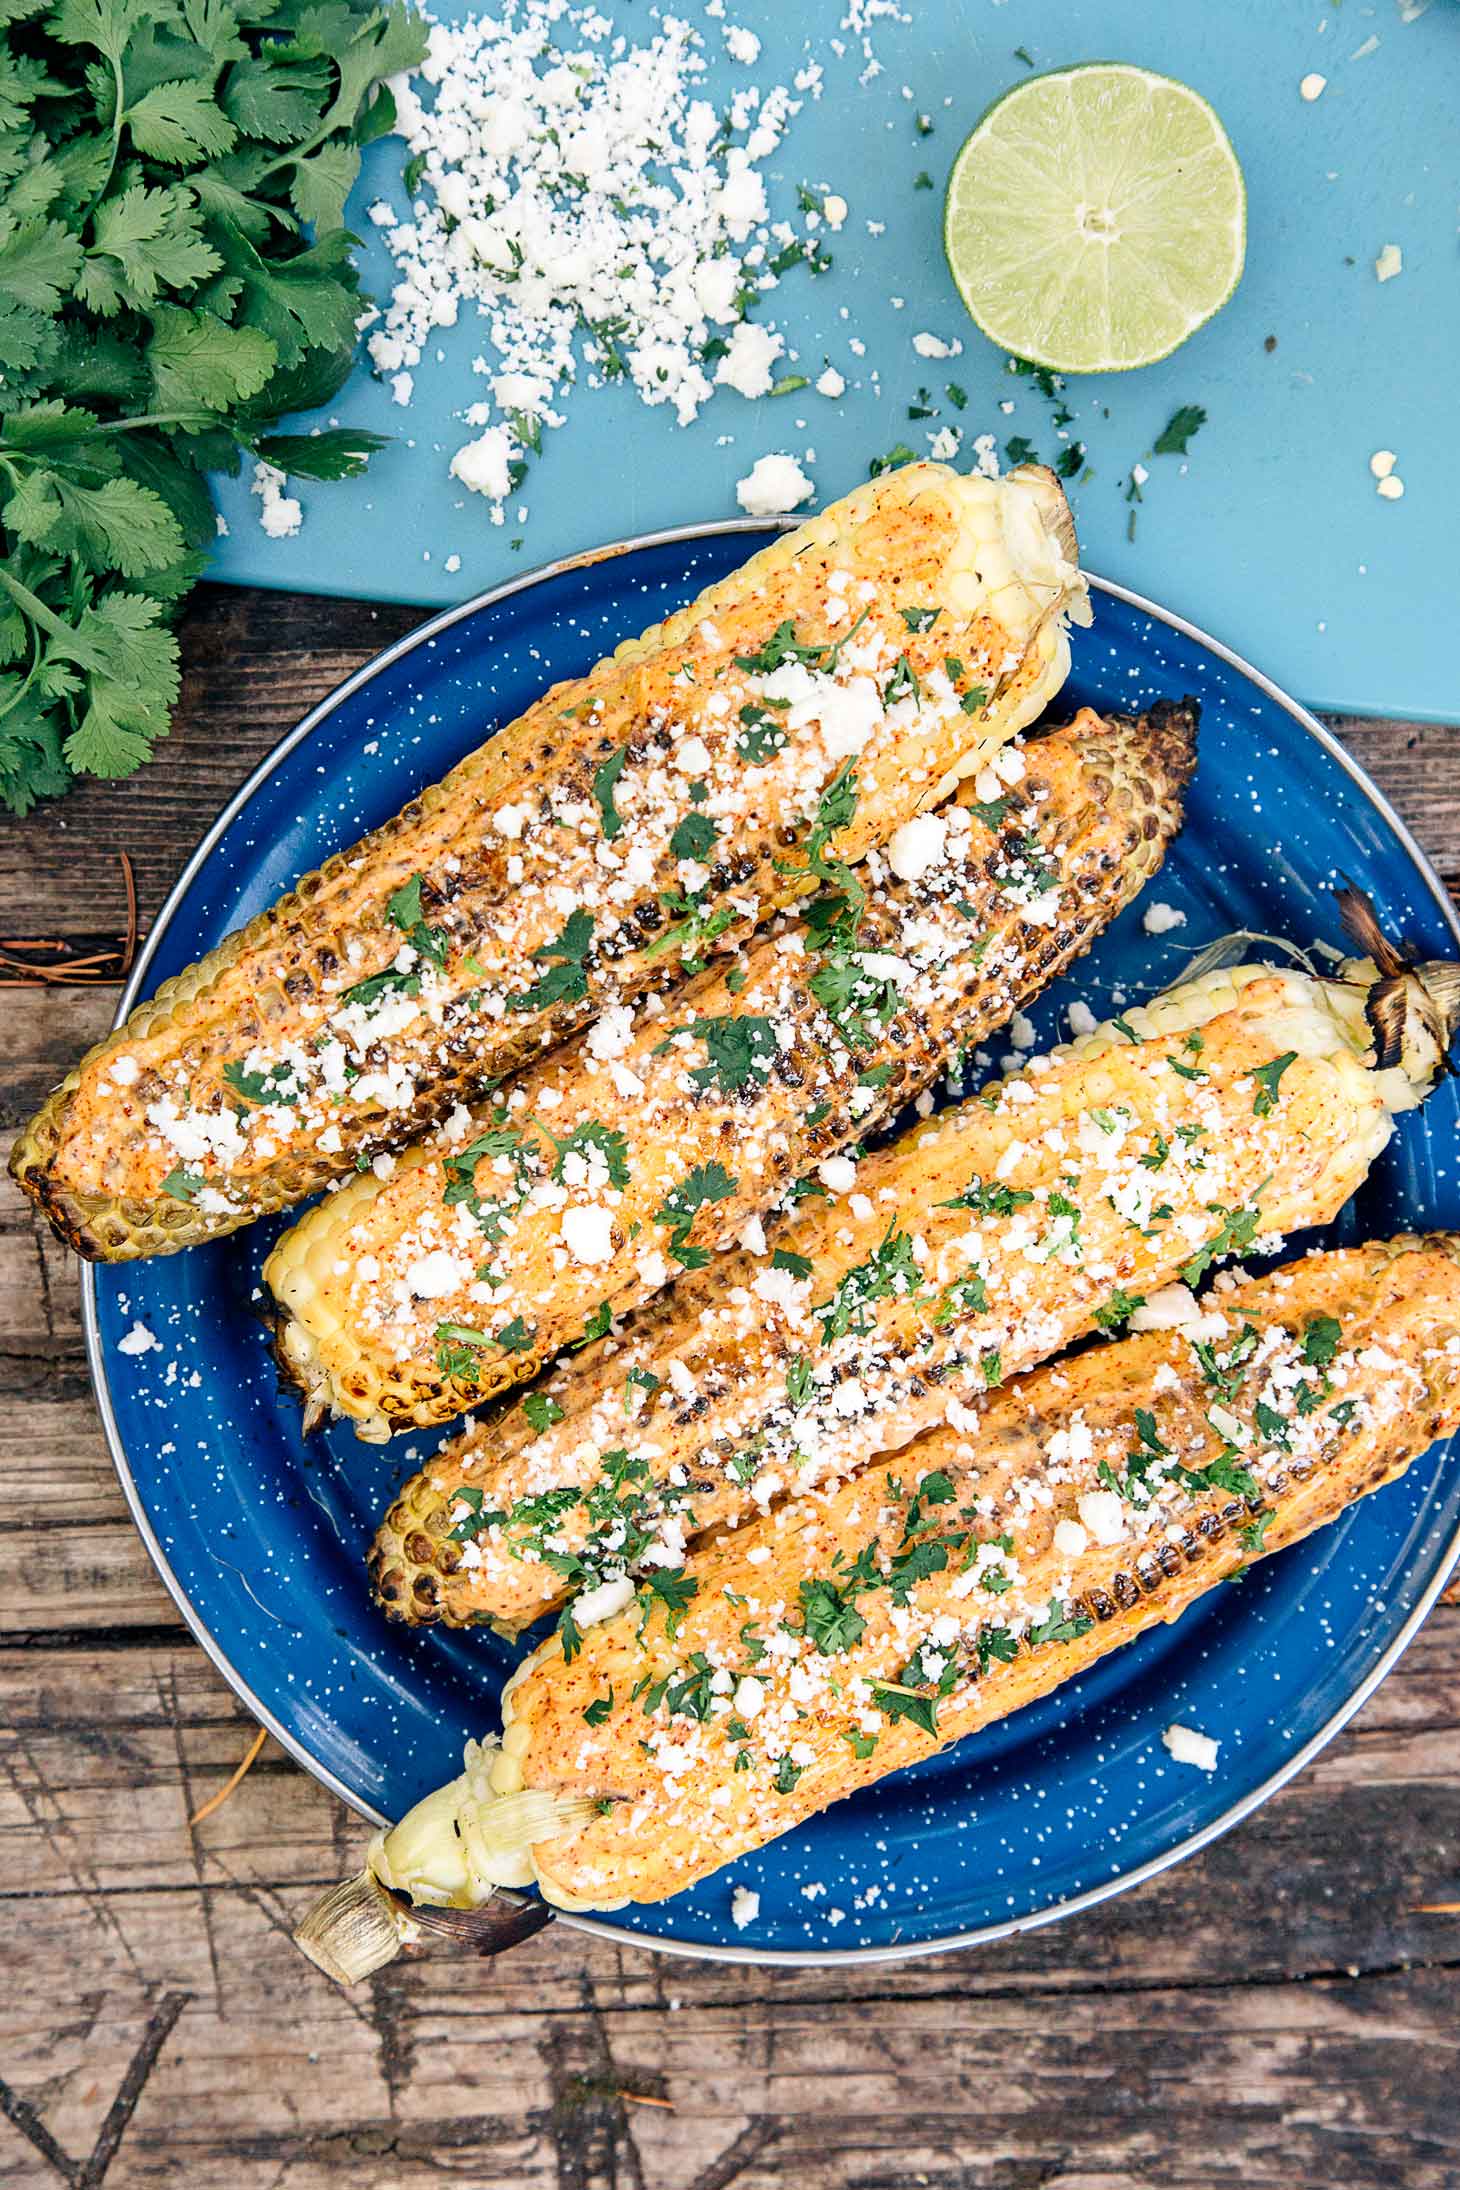 Elotes - grilled Mexican street corn - are a great appetizer to cook over the campfire!